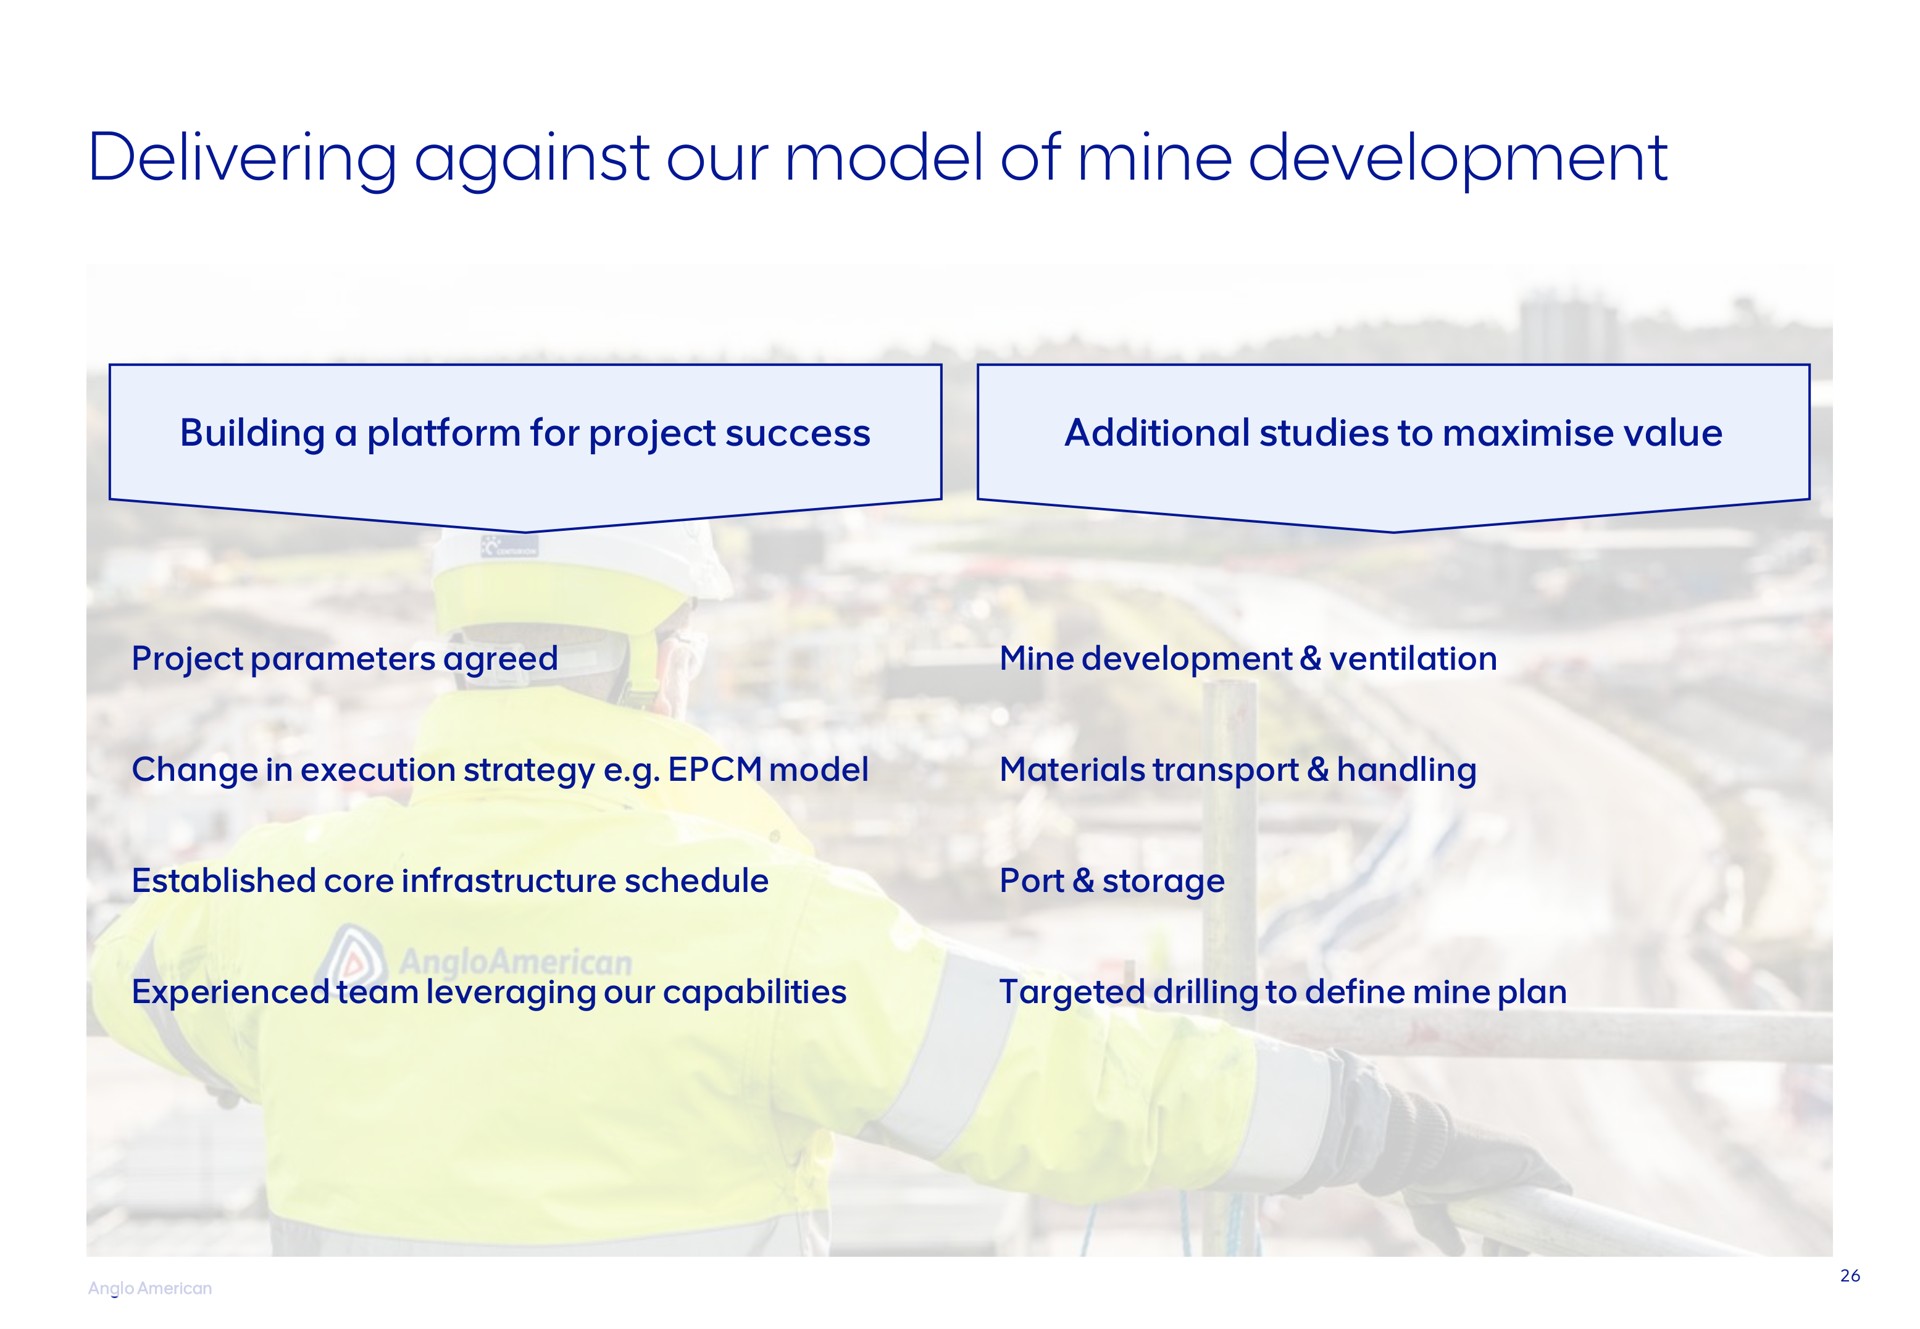 delivering against our model of mine development | AngloAmerican